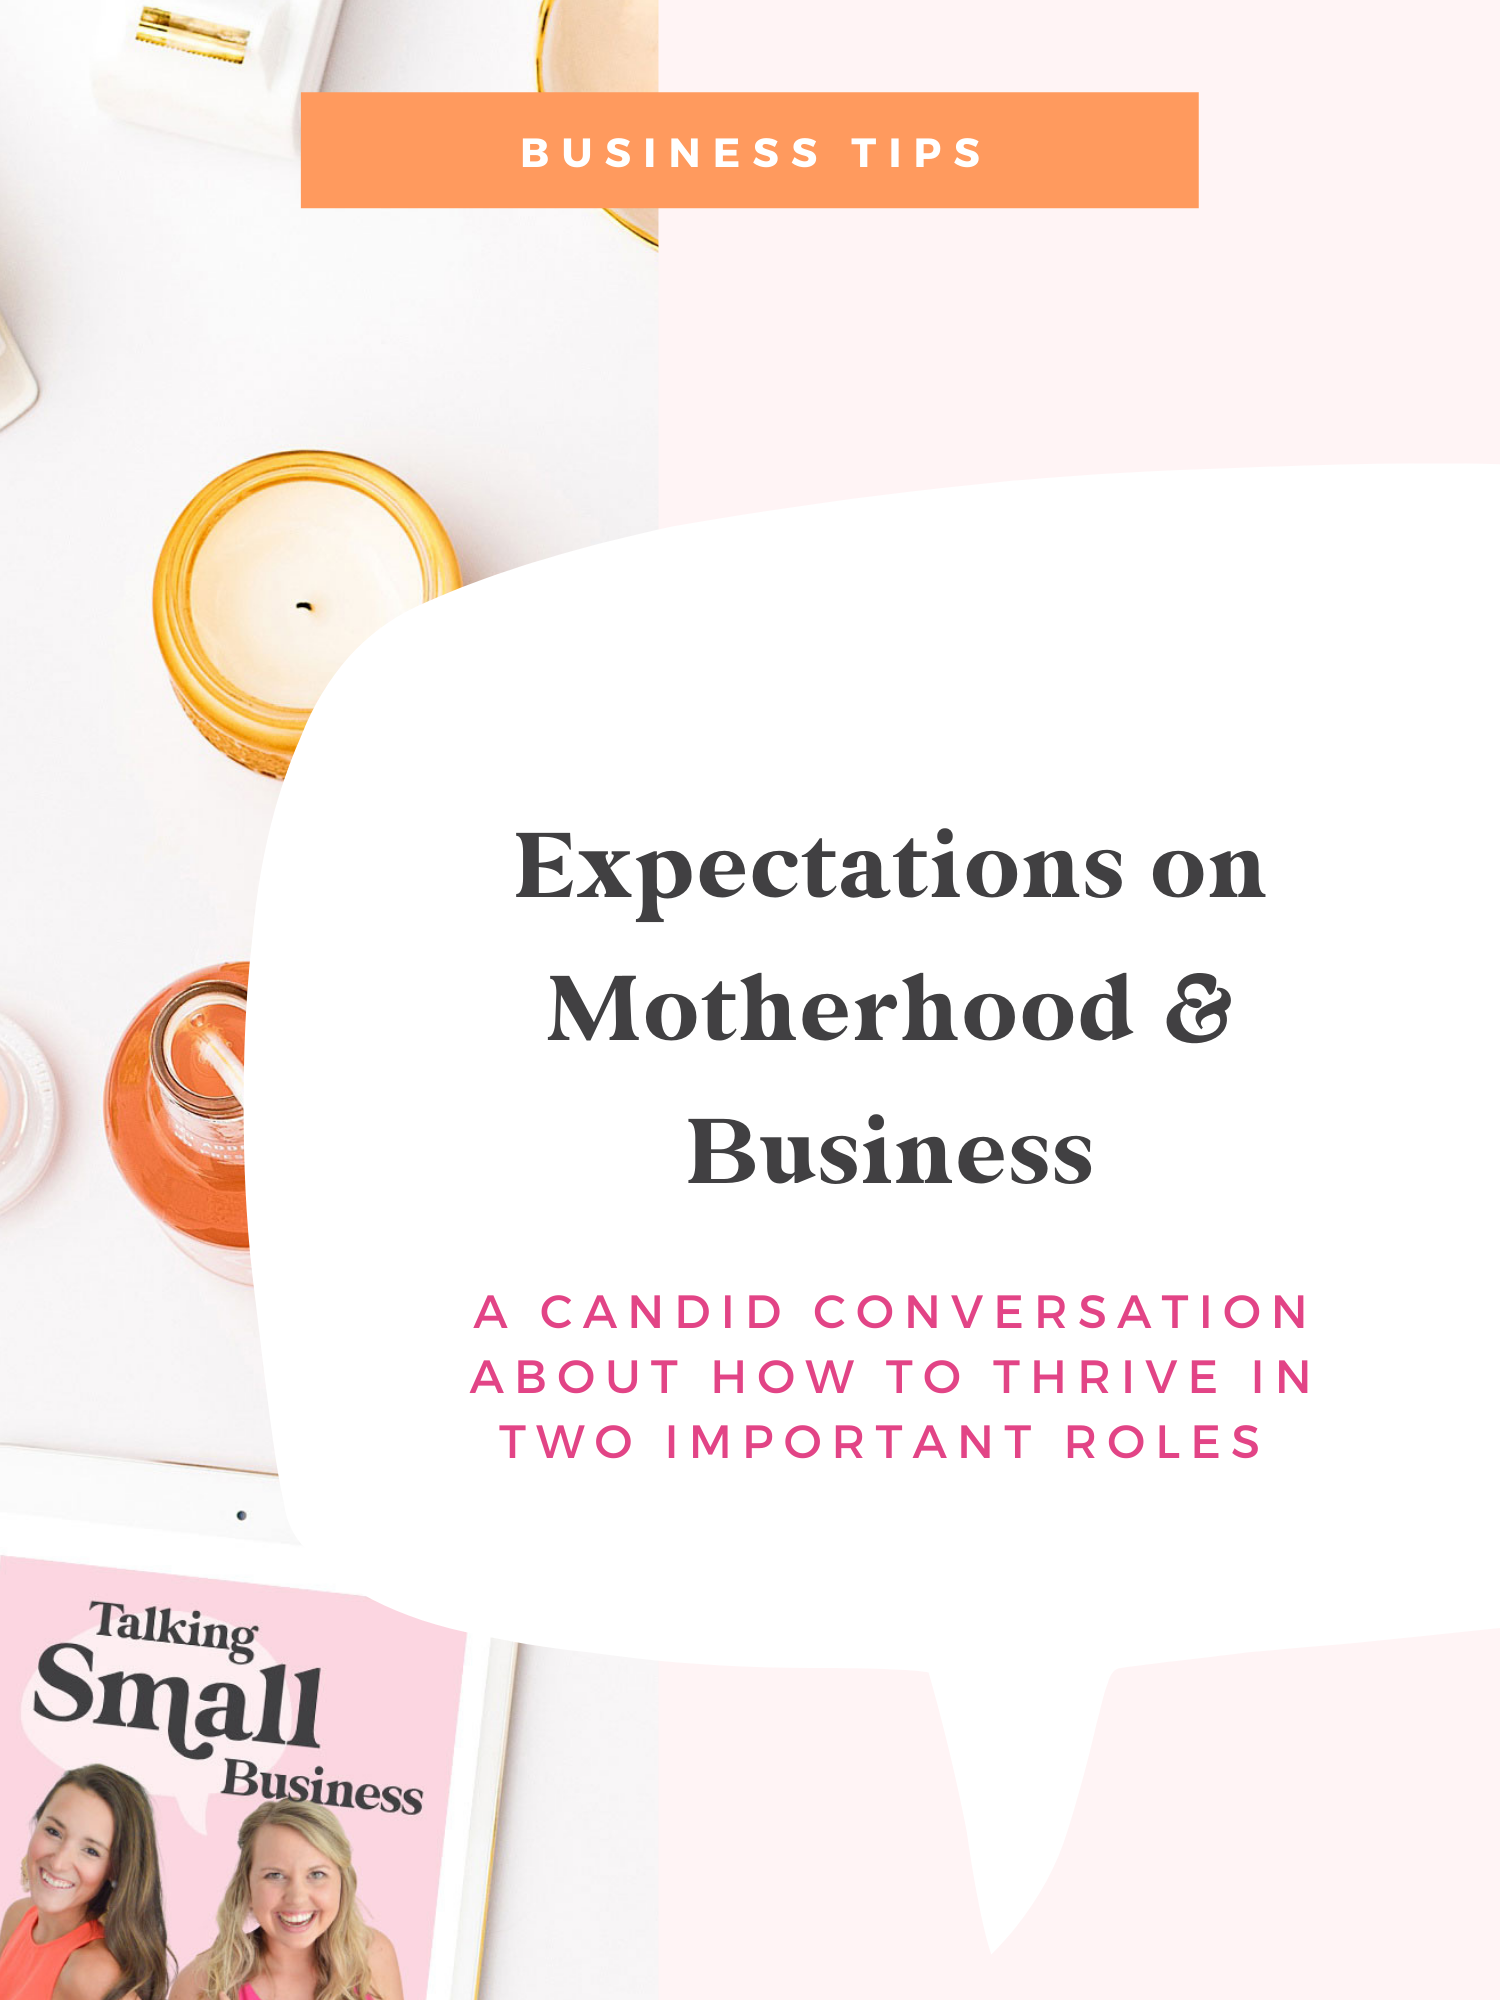 Expectations on Motherhood & Business: A Candid Conversation between Kat Schmoyer and Megan Martin on Talking Small Business